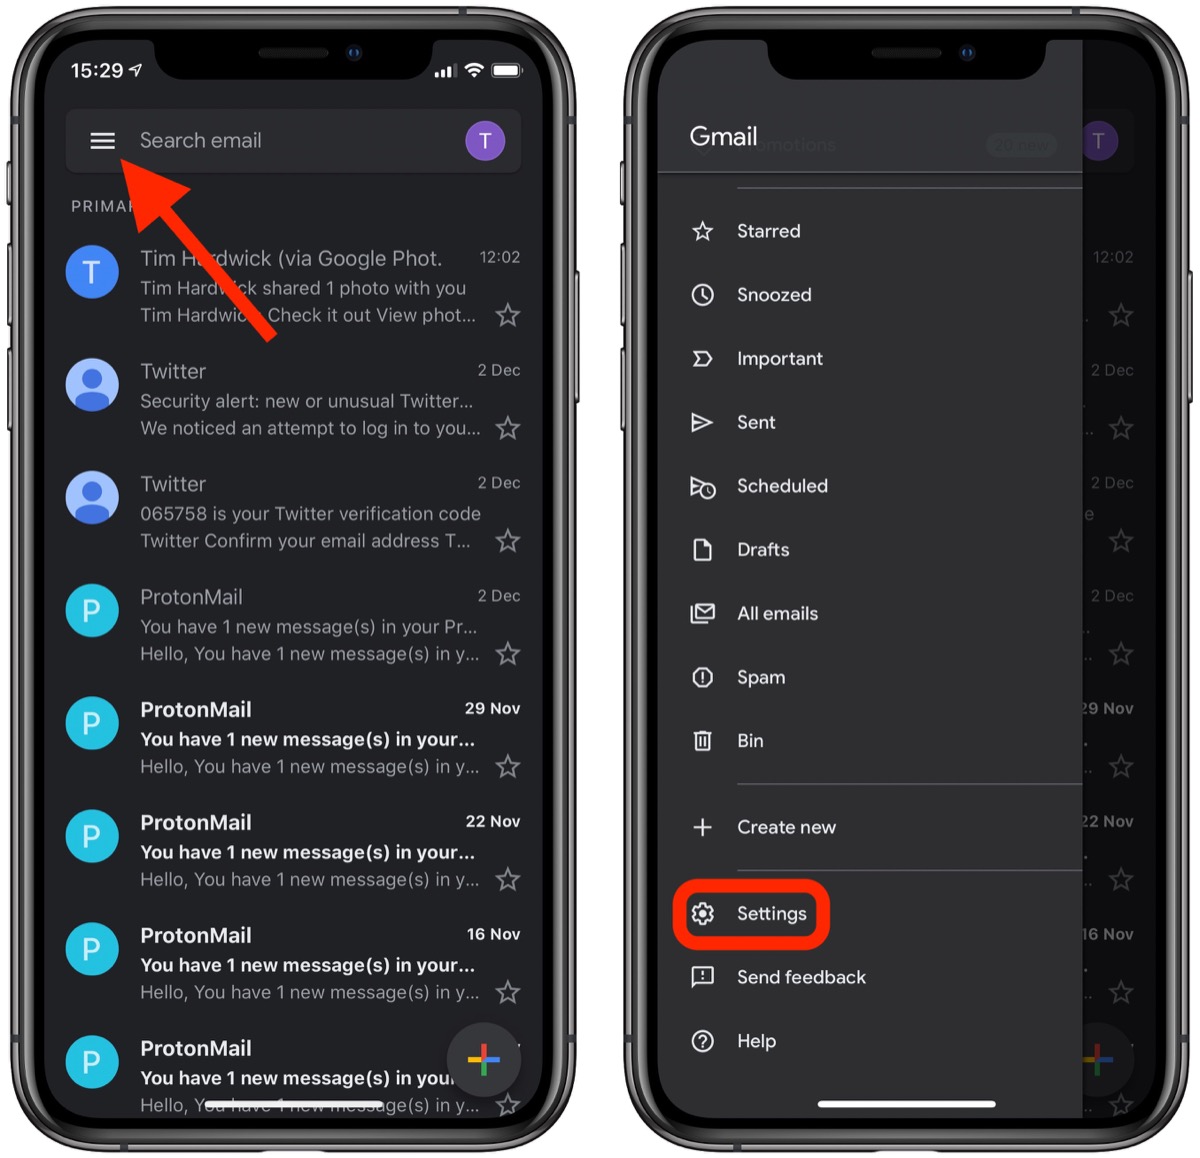 2how-to-enable-dark-mode-in-the-gmail-app-for-ios-.jpg